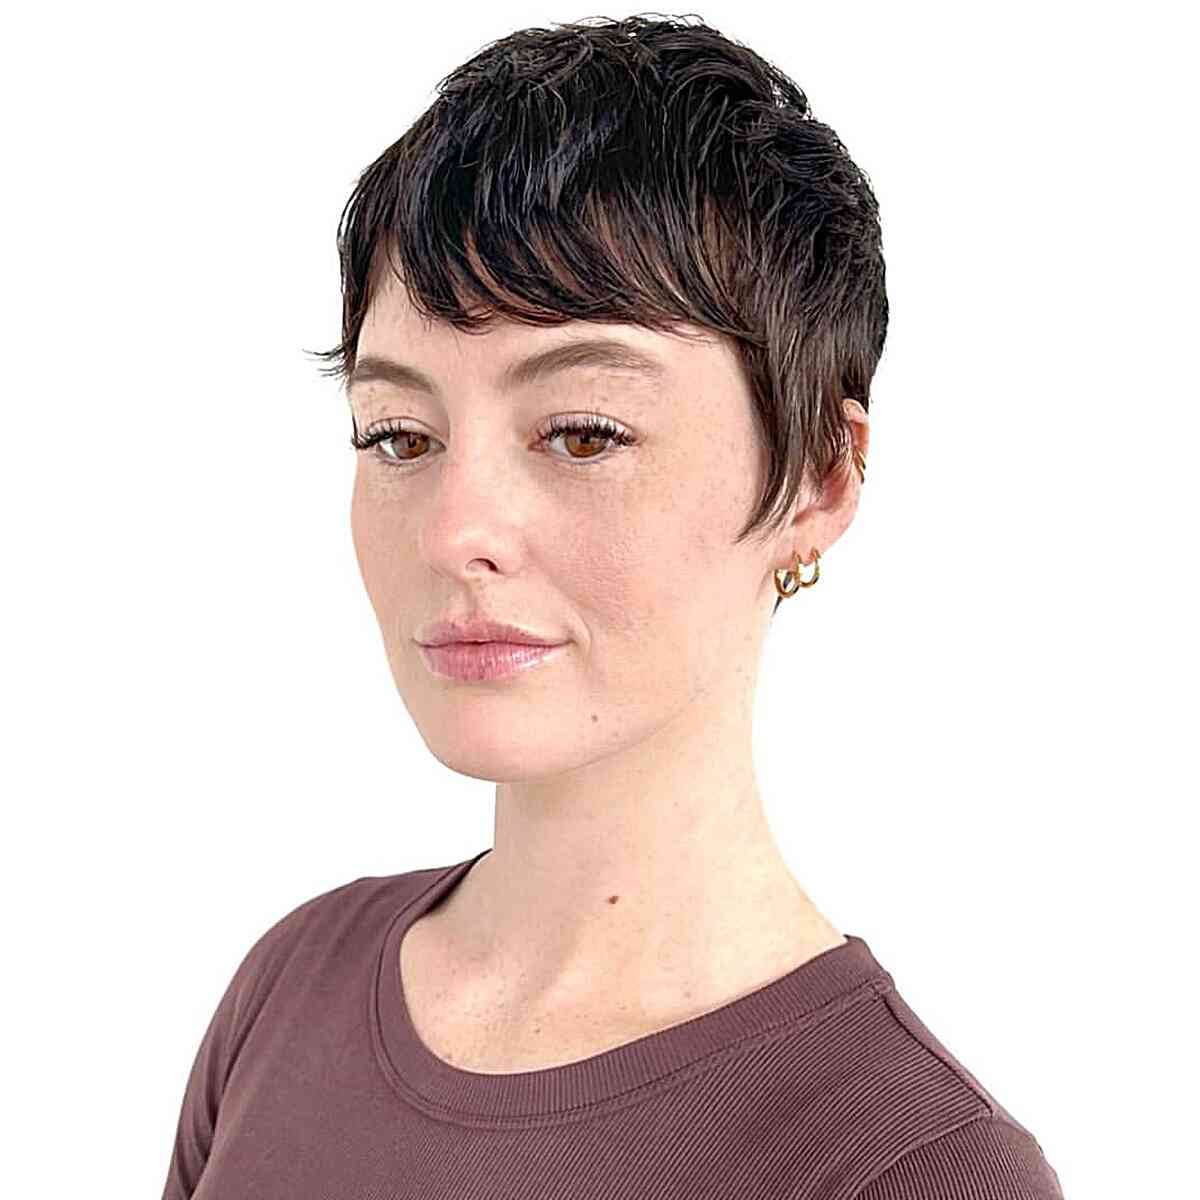 90s-Inspired Short Cropped Pixie Hair with Swoopy Bangs